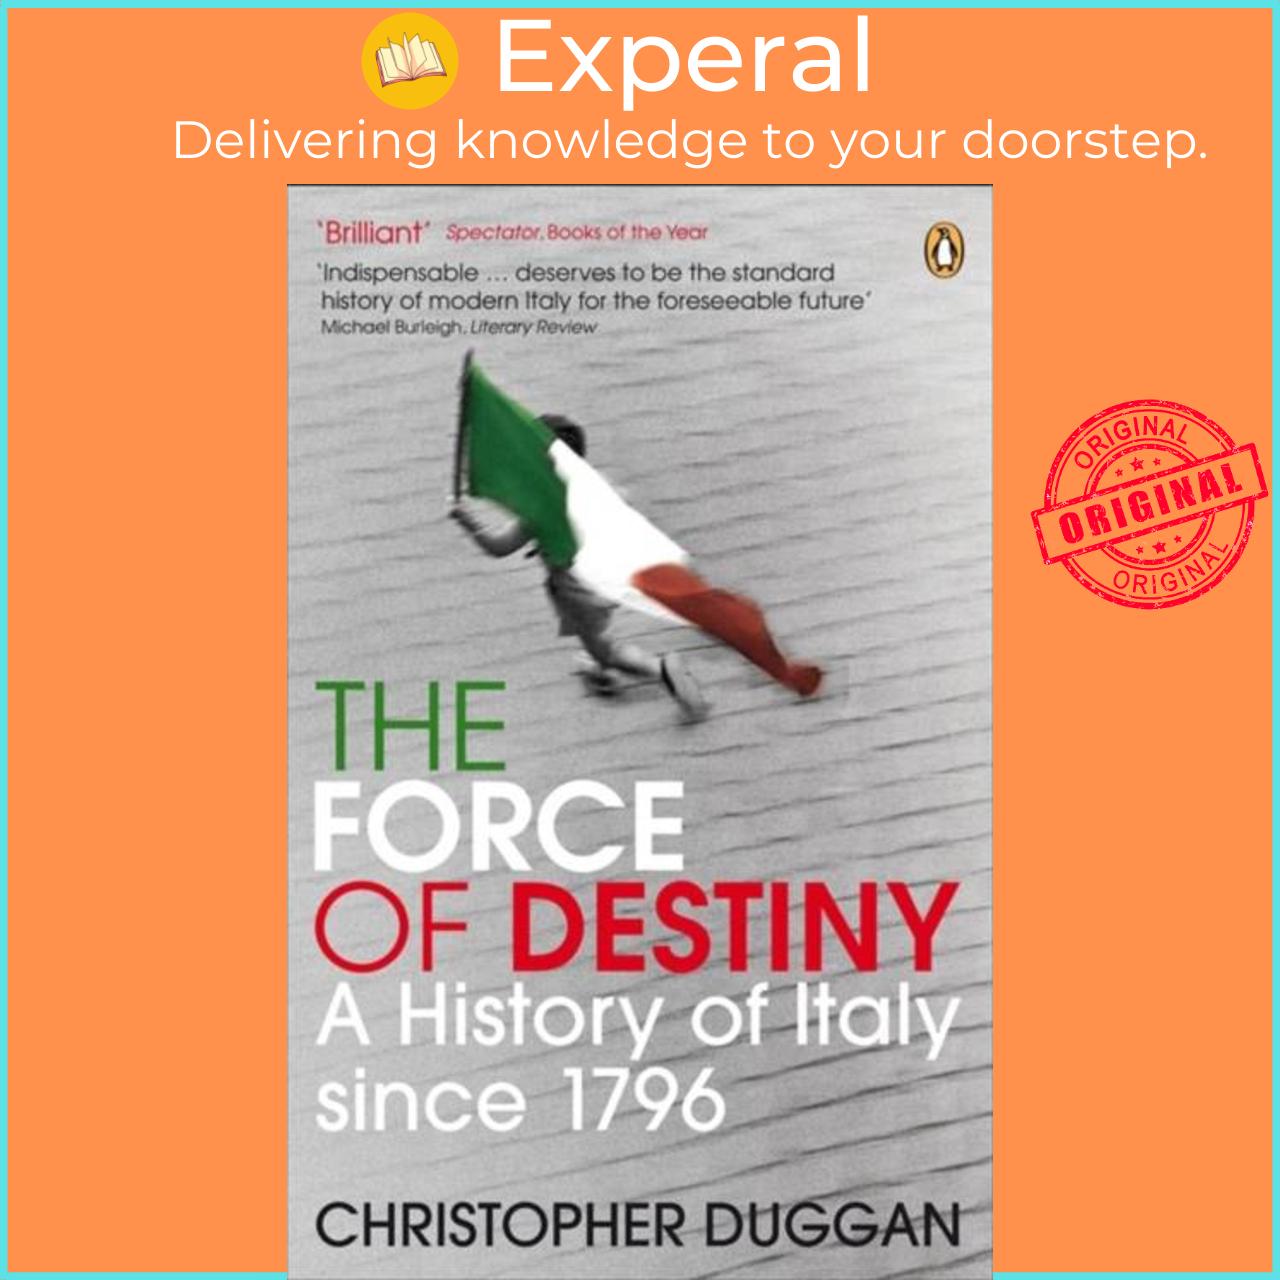 Sách - The Force of Destiny - A History of Italy Since 1796 by Christopher Duggan (UK edition, paperback)